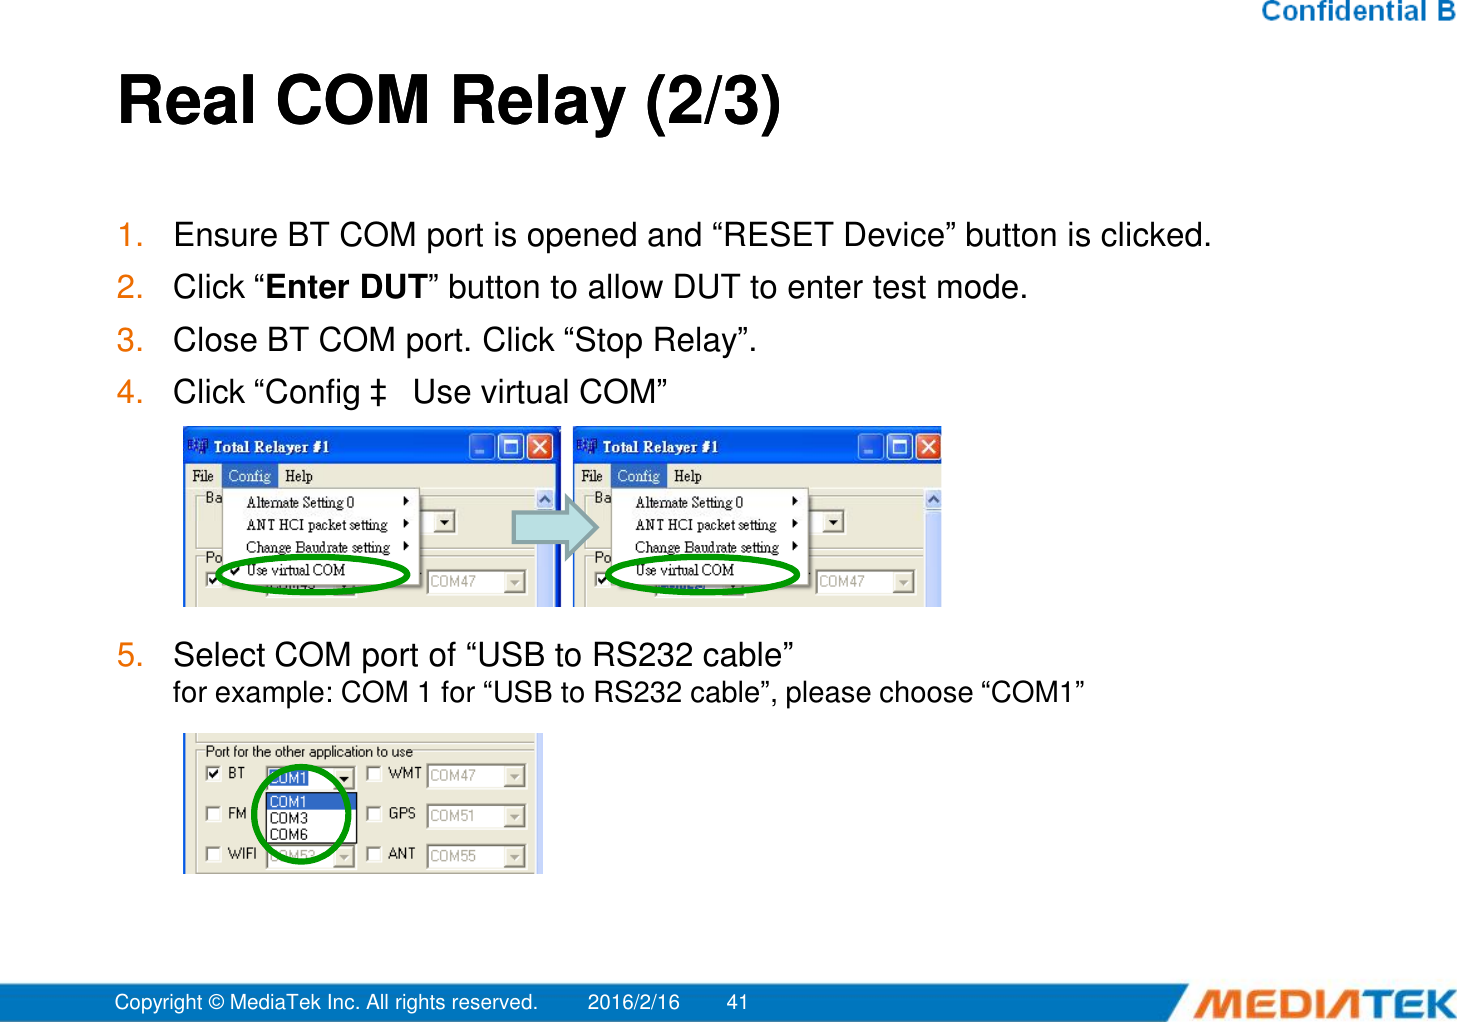 Real COM Relay (2/3)Real COM Relay (2/3)1. Ensure BT COM port is opened and “RESET Device” button is clicked.2. Click “Enter DUT” button to allow DUT to enter test mode.3. Close BT COM port. Click “Stop Relay”.4. Click “Config àUse virtual COM”5. Select COM port of “USB to RS232 cable”for example: COM 1 for “USB to RS232 cable”, please choose “COM1”2016/2/16Copyright © MediaTek Inc. All rights reserved. 41